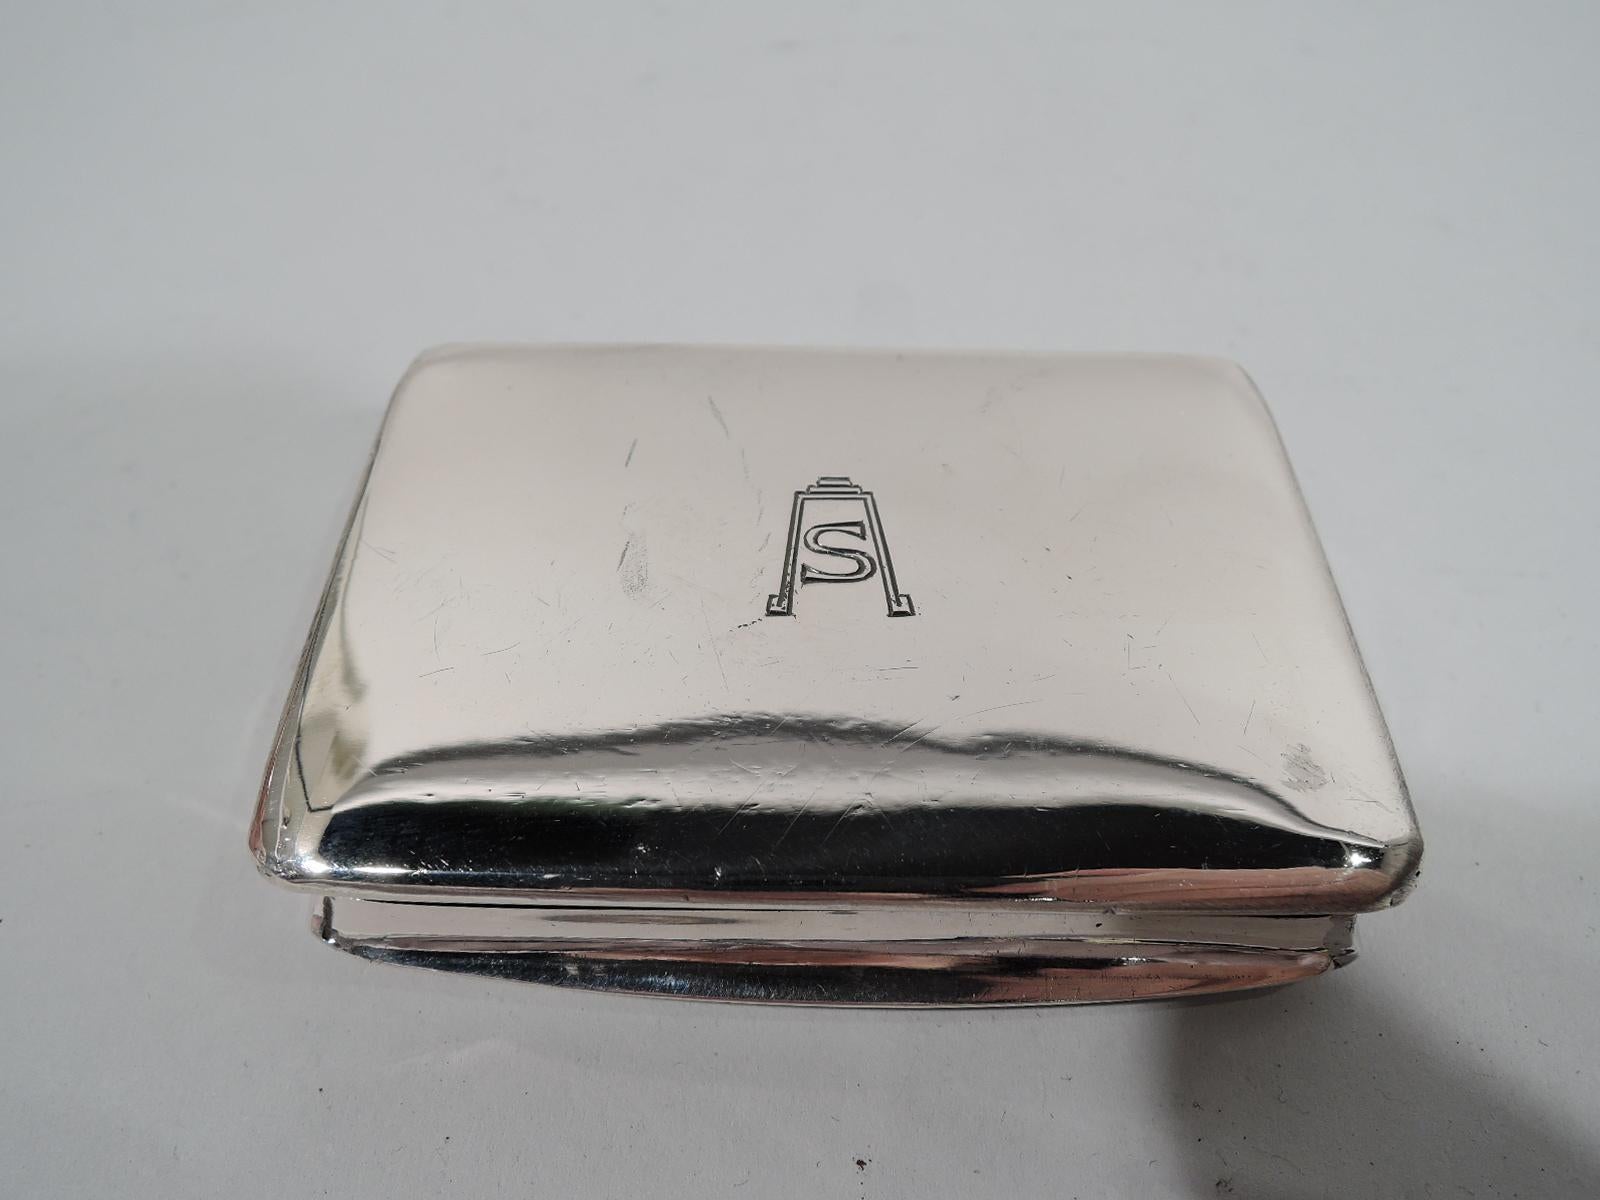 European silver case with enameled dog, ca 1910. Rectangular with concave sides and hinged cover. On cover top reposes a placid, recumbent mastiff with soulful eyes. Back plain with engraved Art Deco S-letter monogram. Interior gilt. Marked. 